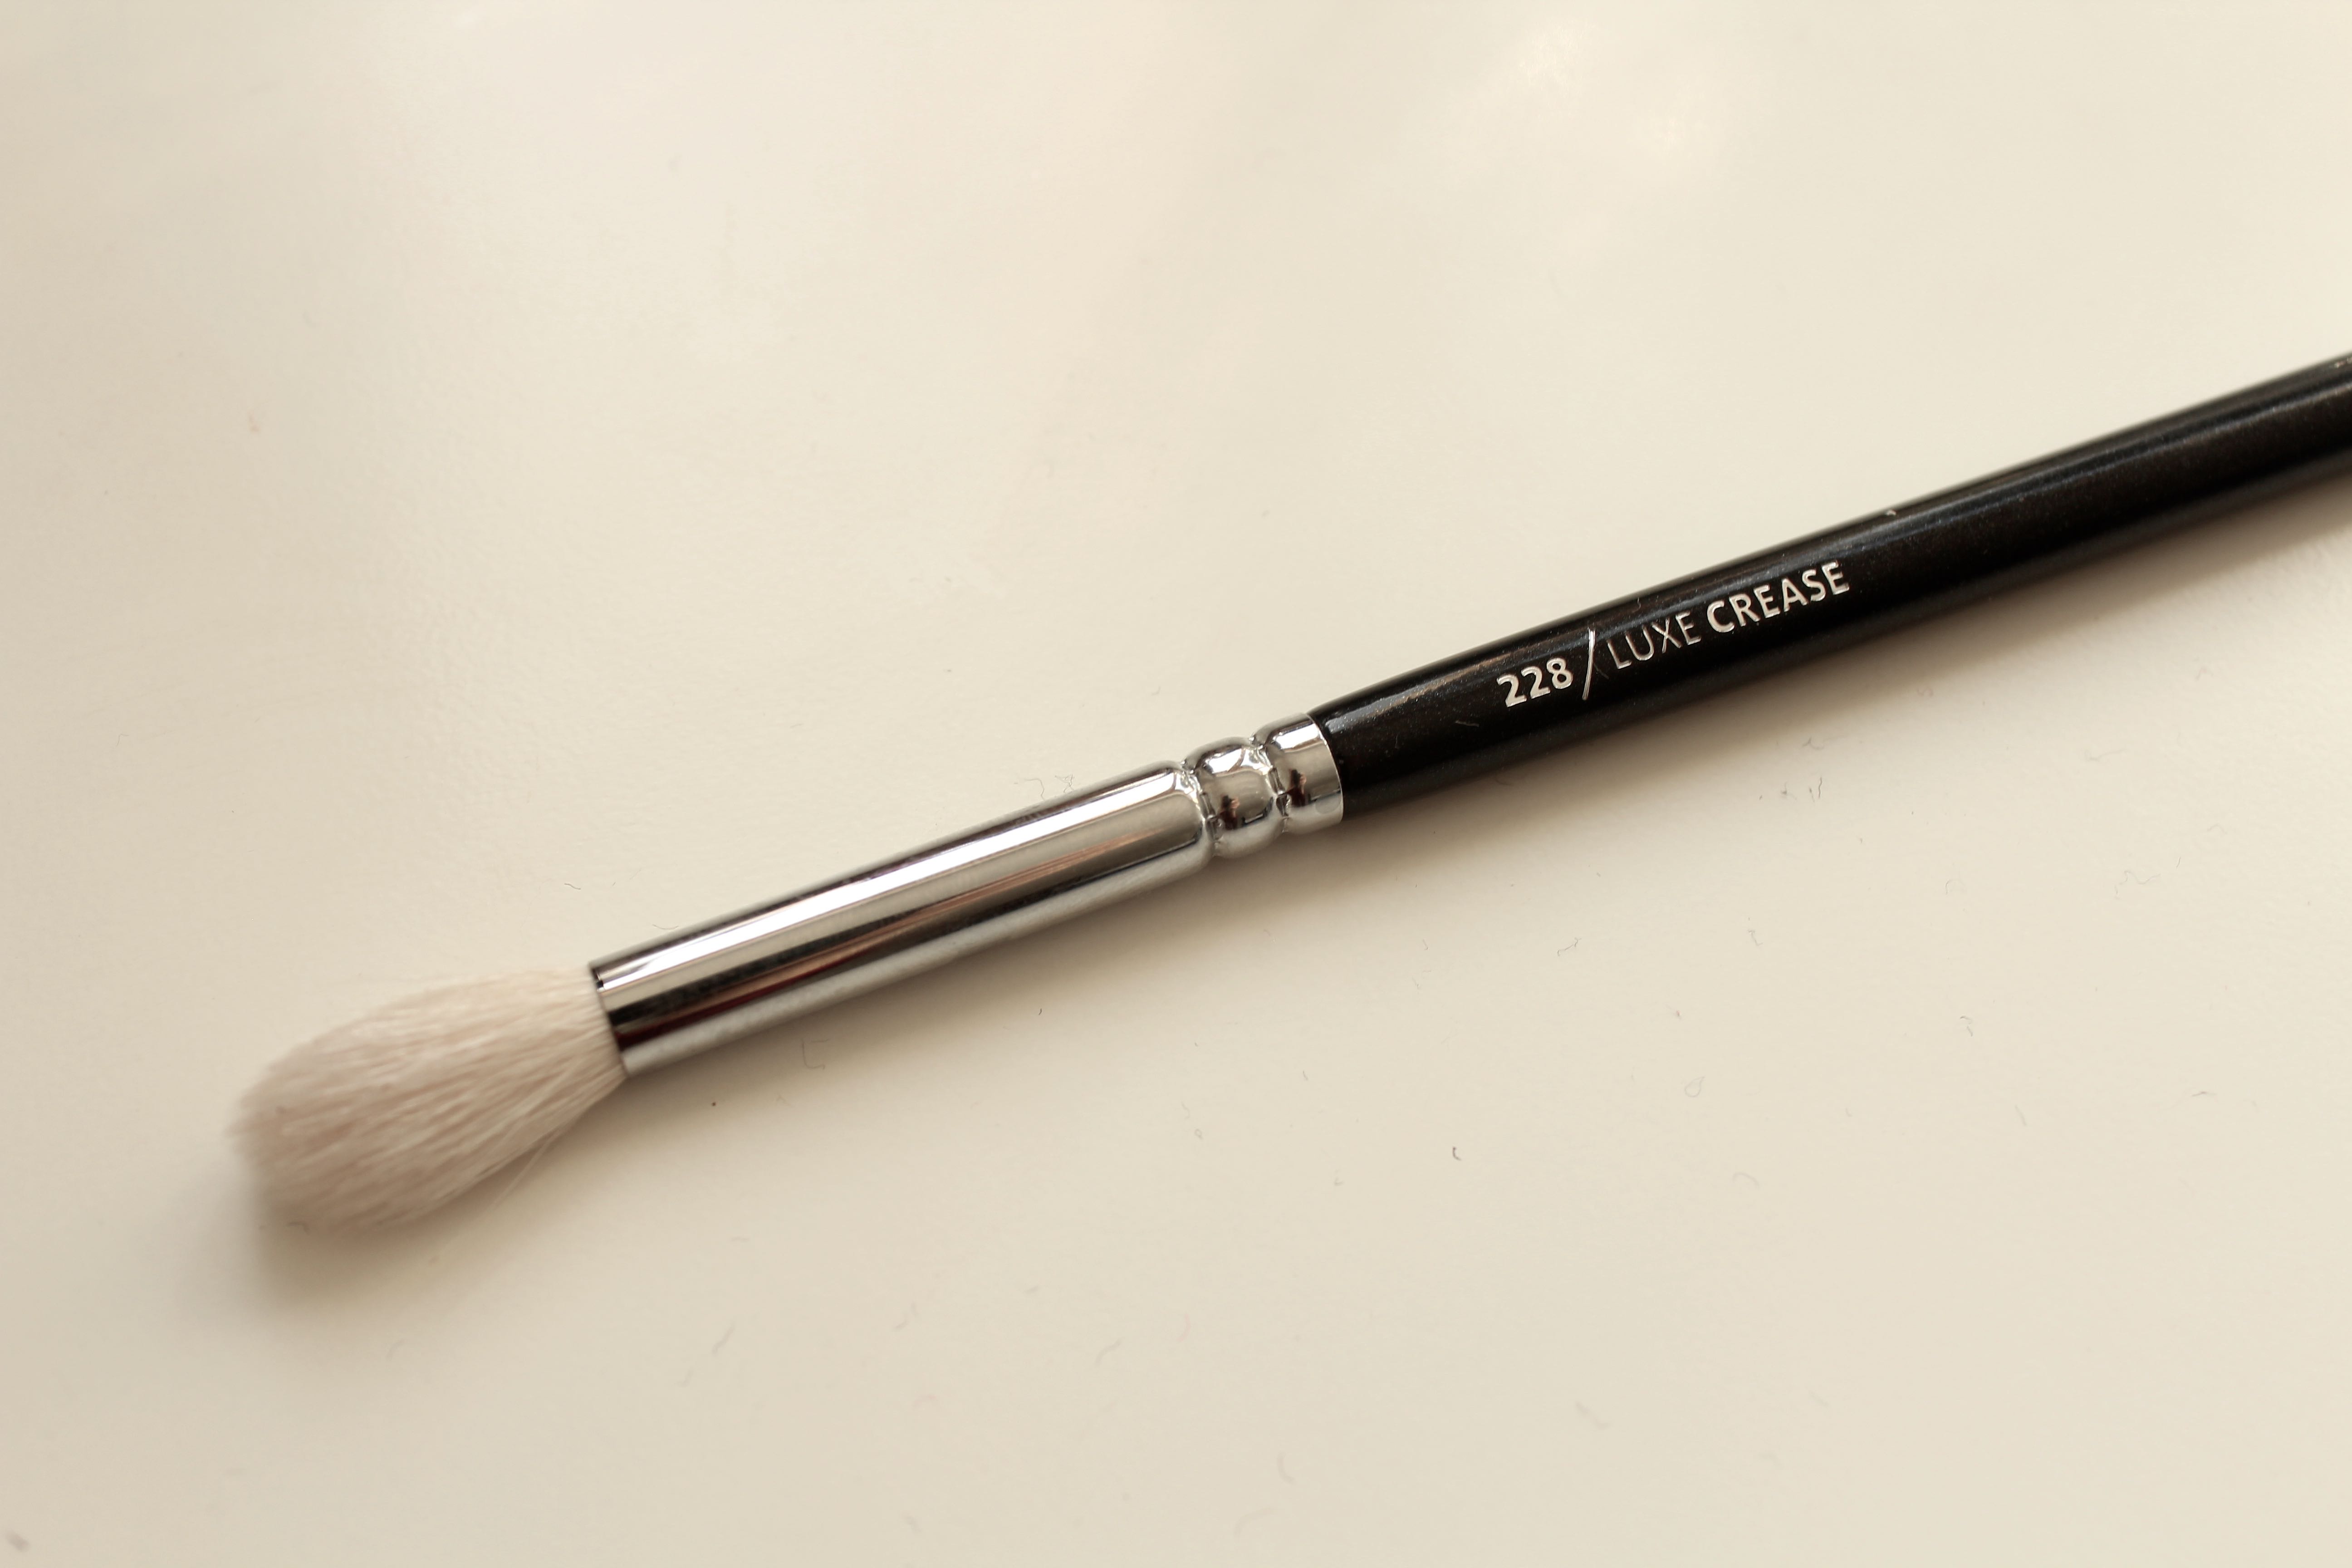 Best 7 Makeup Brushes for Smaller Eyes - Zoeva 228 Luxe Crease Eye Brush by Face Made Up